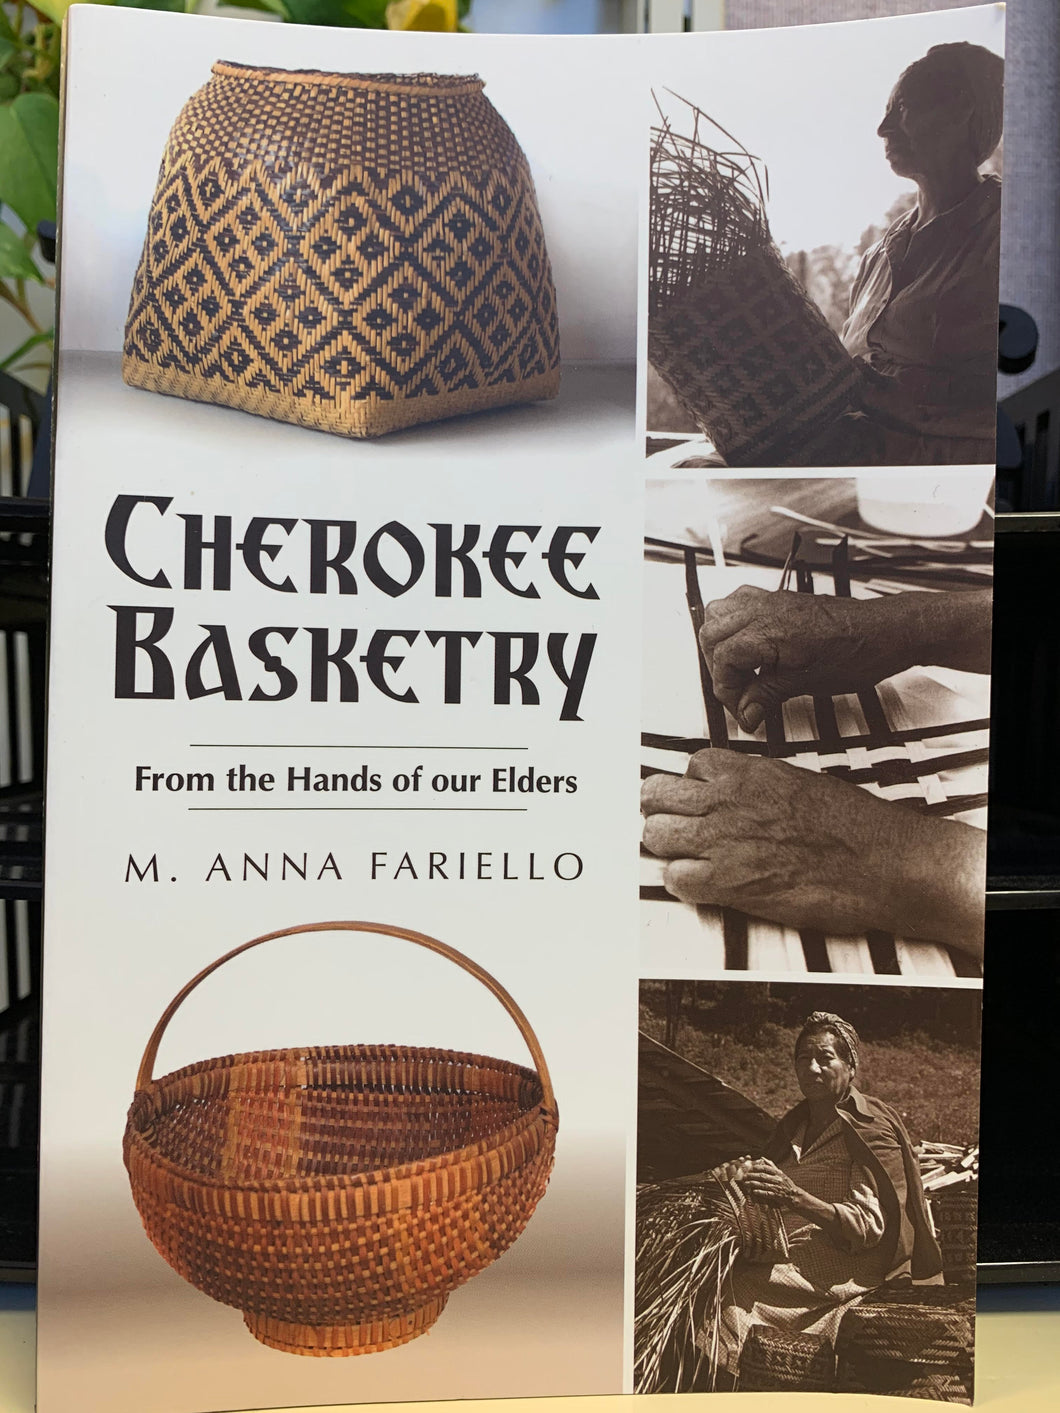 Cherokee Basketry: From the Hands of our Elders by M. Anna Fariello